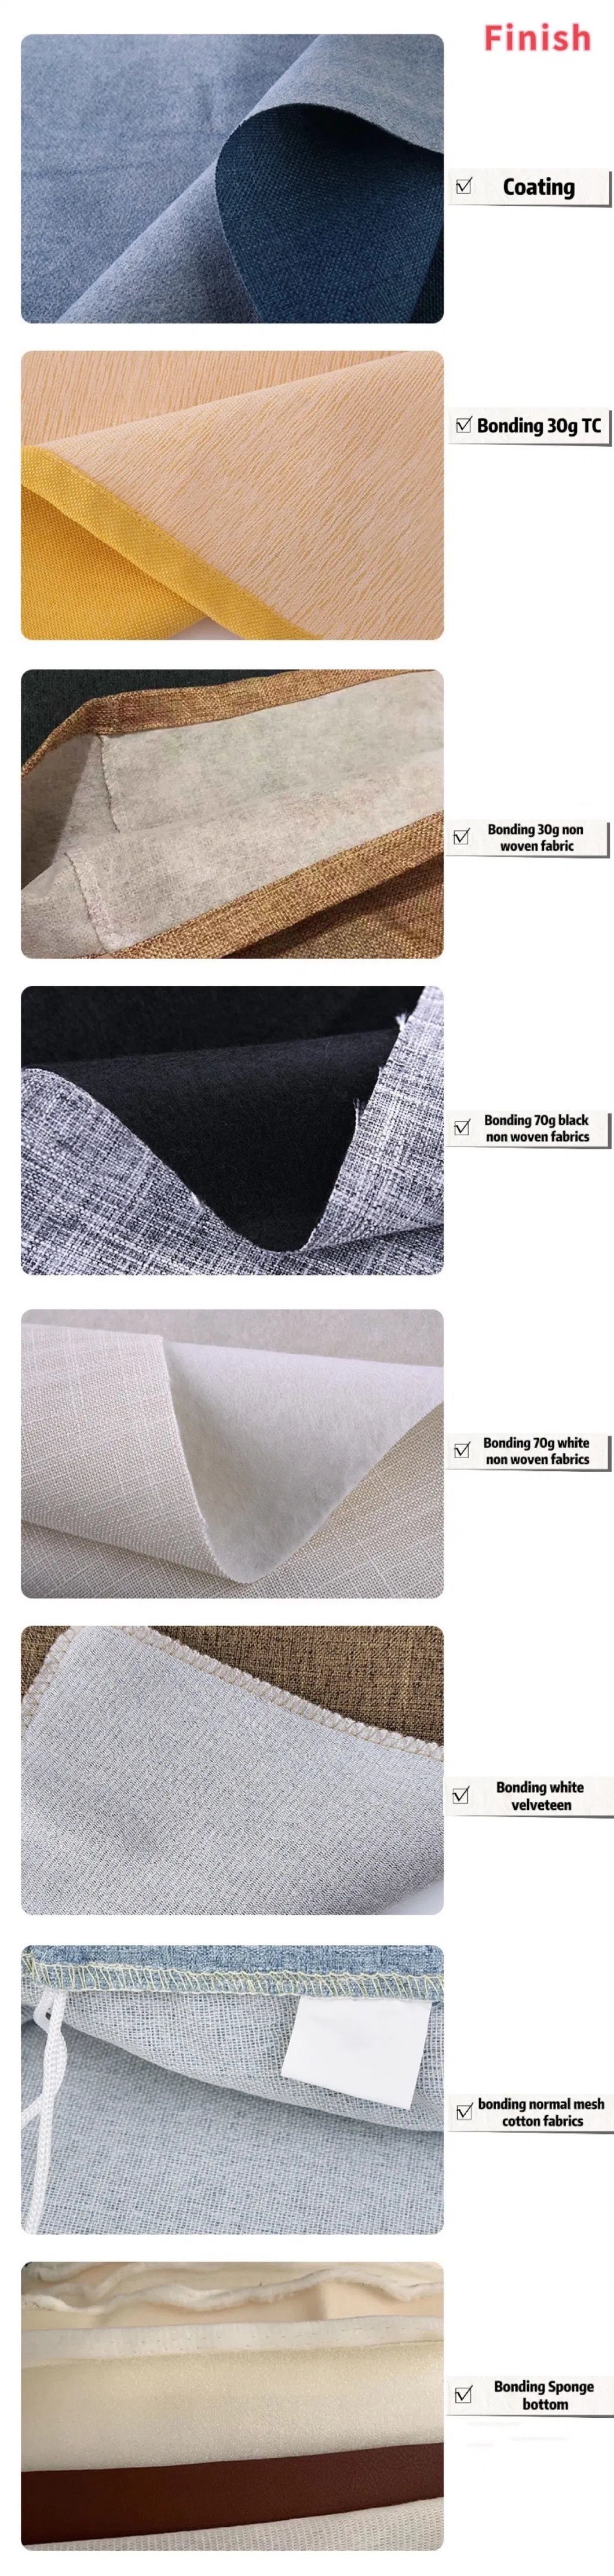 (77 colors available in stock) China Wholesale Upholstery Fabric Polyester Faux Linen Fabric/Imitation Hemp Fabric for Sofa/Cushion/Pet Mat/Tablecloth/Bag